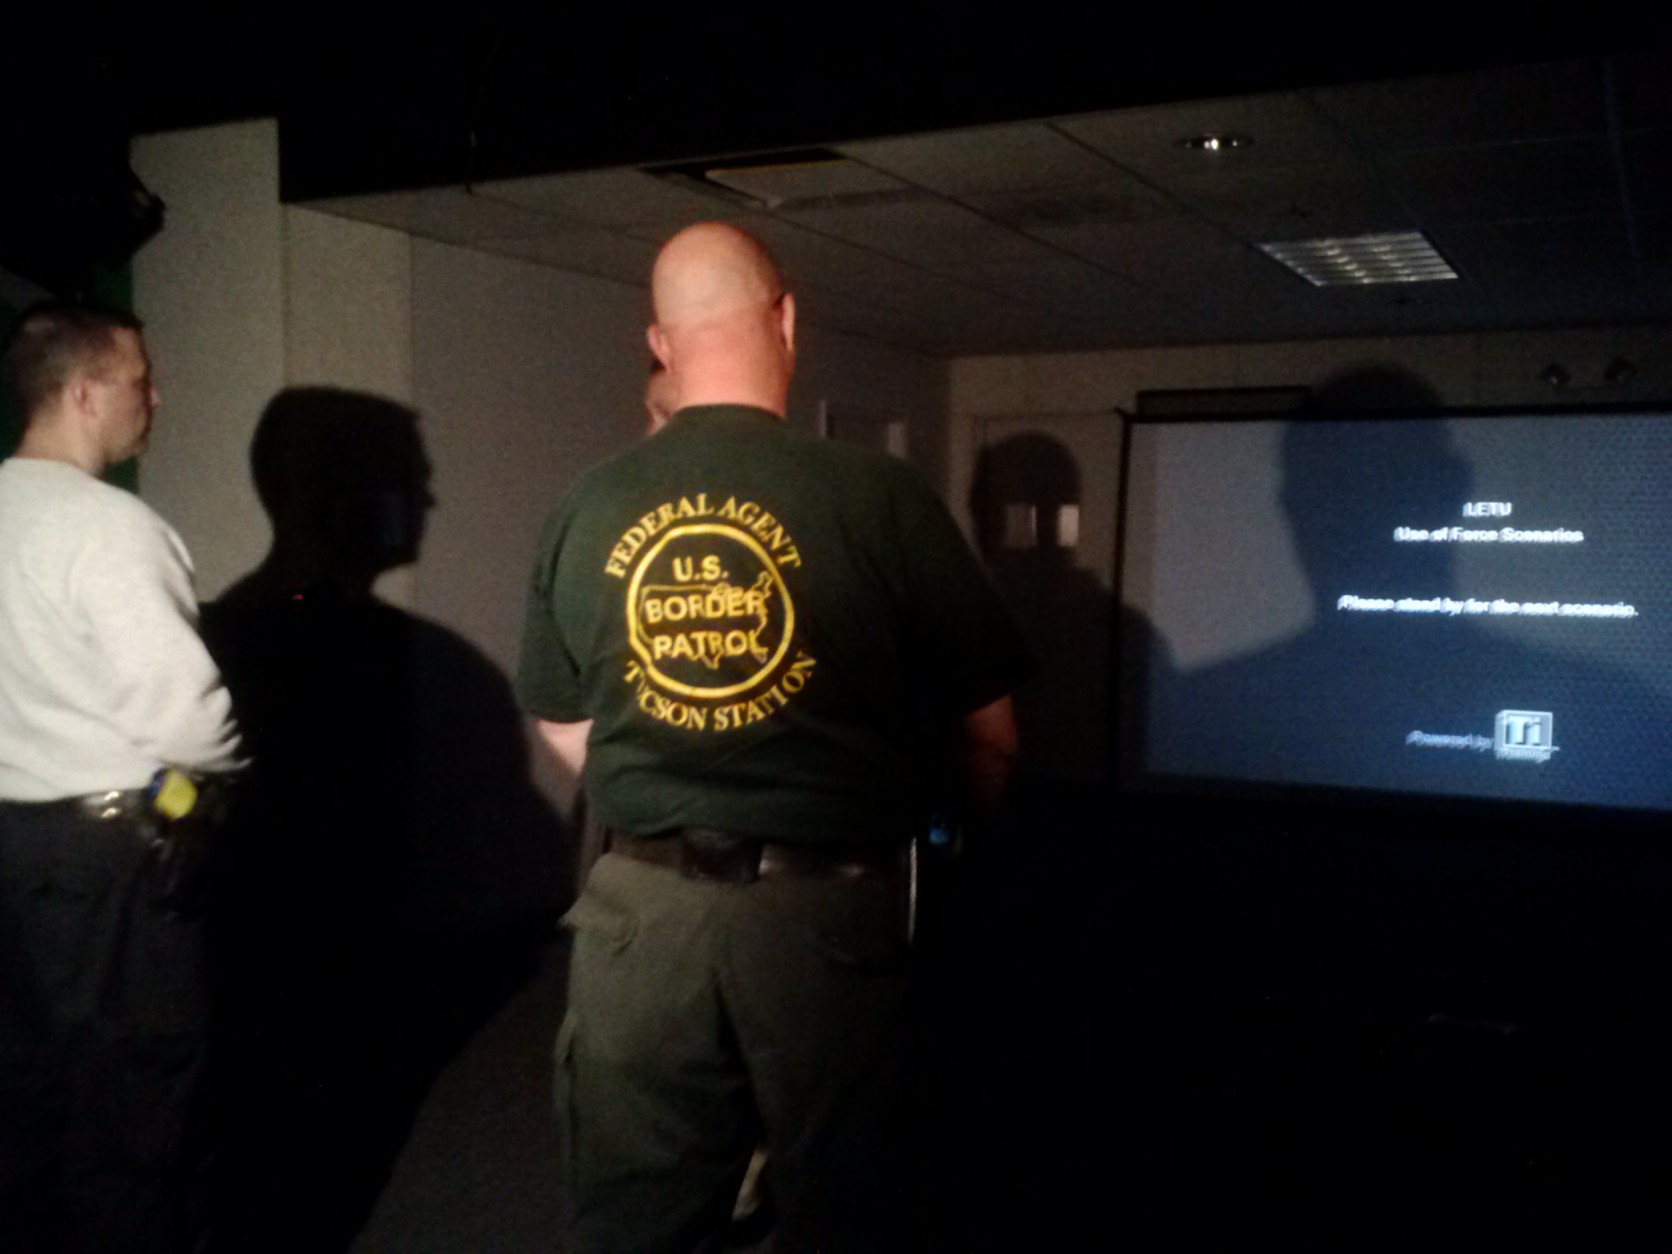  A trainer explains to officers how the simulator works. (WTOP/Max Smith)